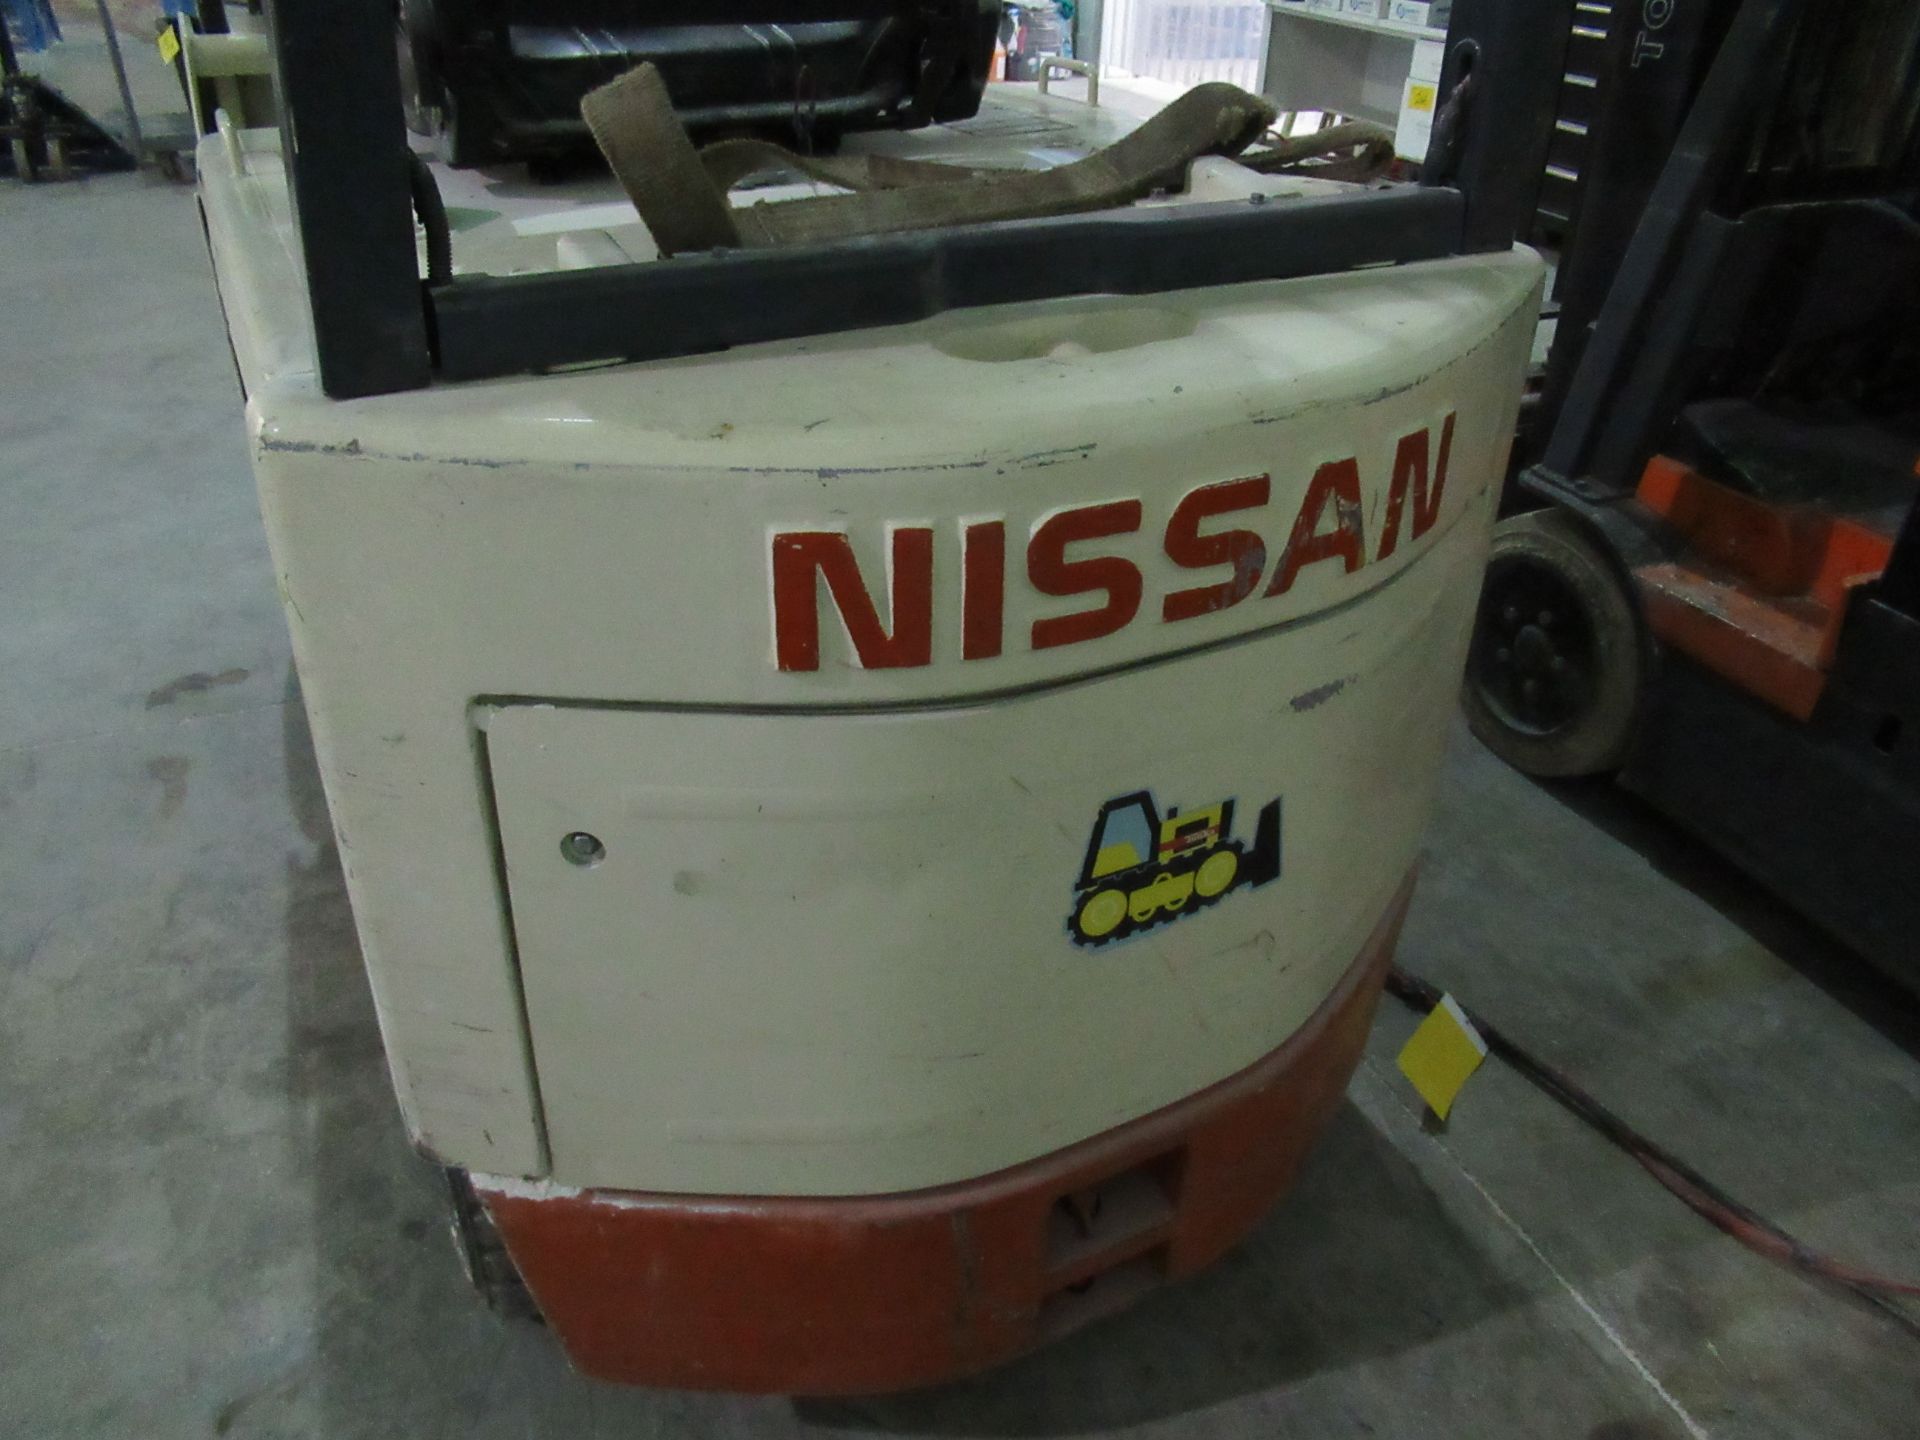 NISSAN CYG021-25S, 4,250#, 3-STAGE ELECTRIC FORKLIFT W/SIDESHIFT, C&D FERRO FIVE CHARGER, 6,572 - Image 3 of 5